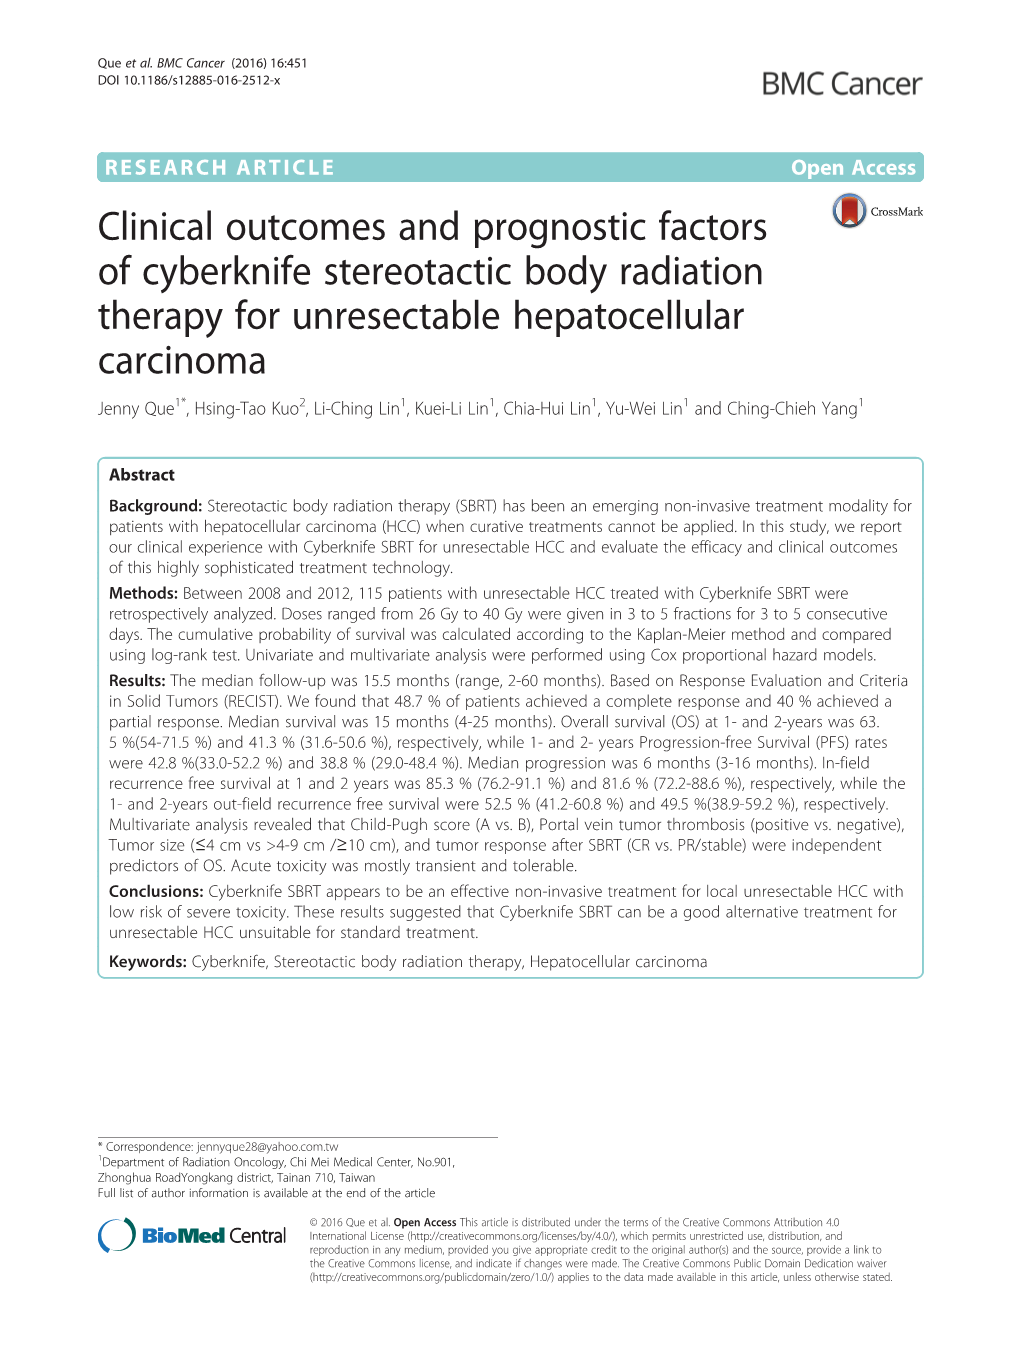 Clinical Outcomes and Prognostic Factors of Cyberknife Stereotactic